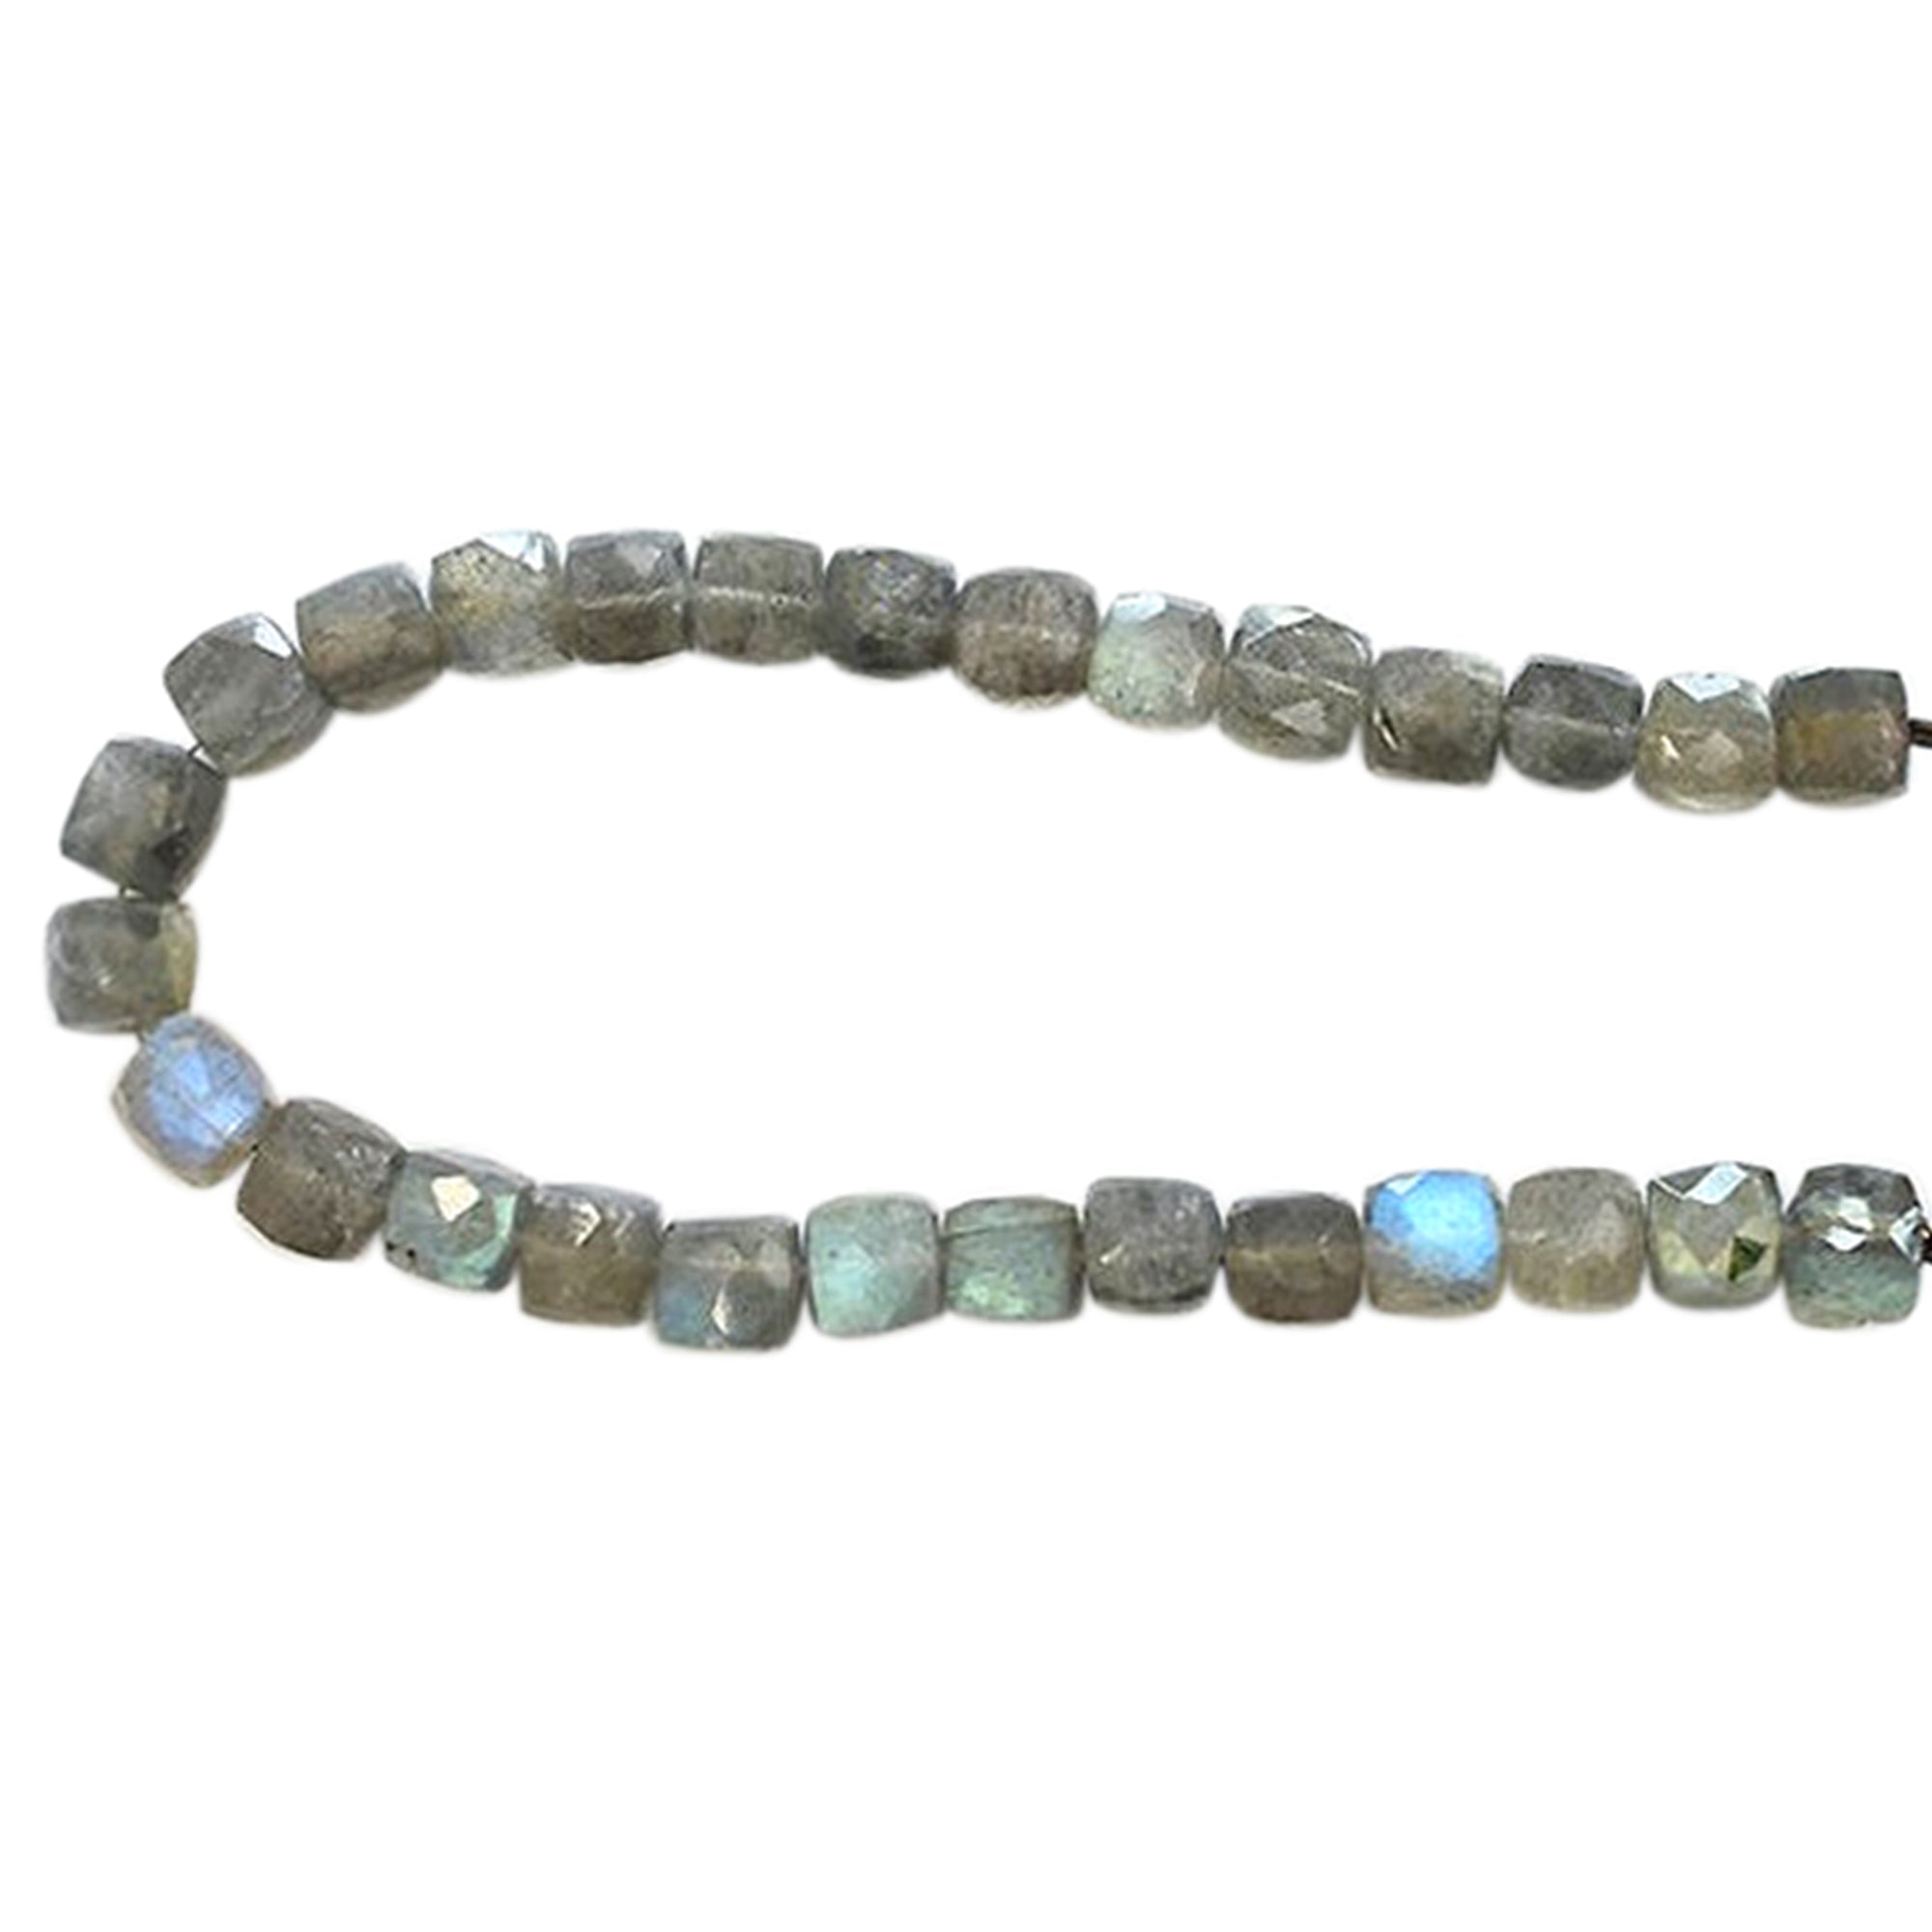 Labradorite 6 To 7 MM Faceted Cube Shape Beads Strand